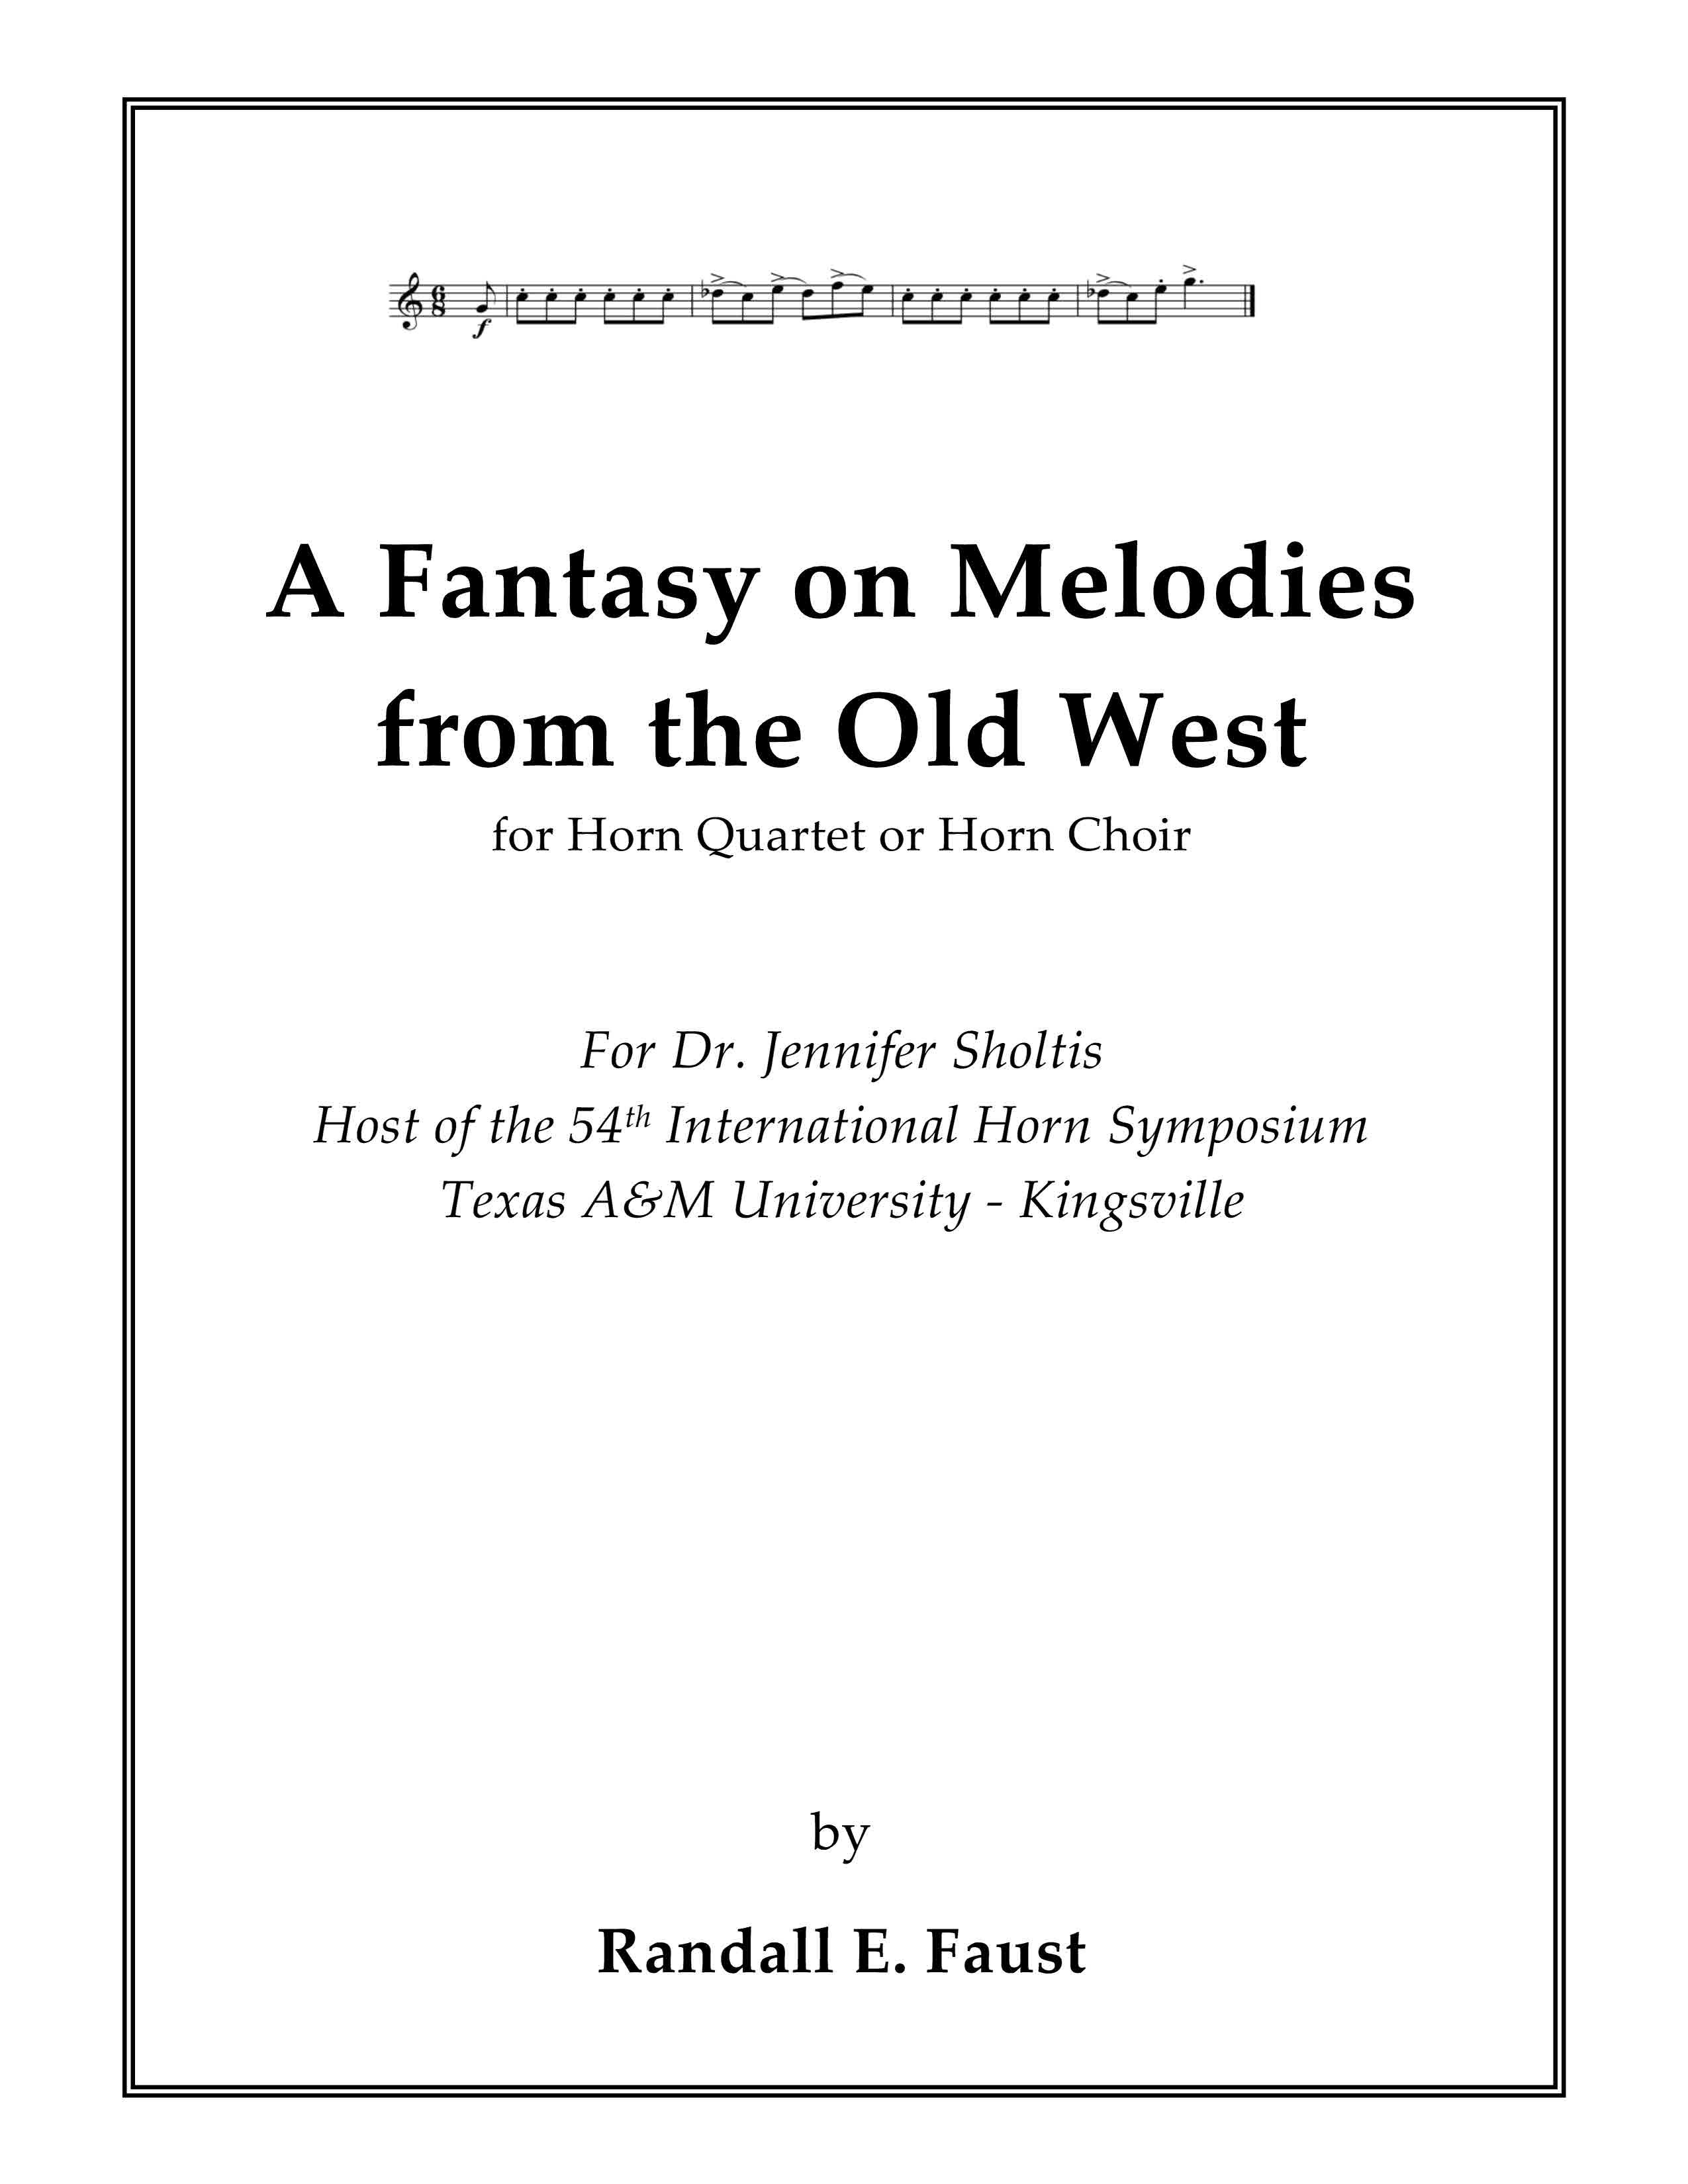 A Fantasy on Melodies from the Old West for Horn Quartet or Horn Choir